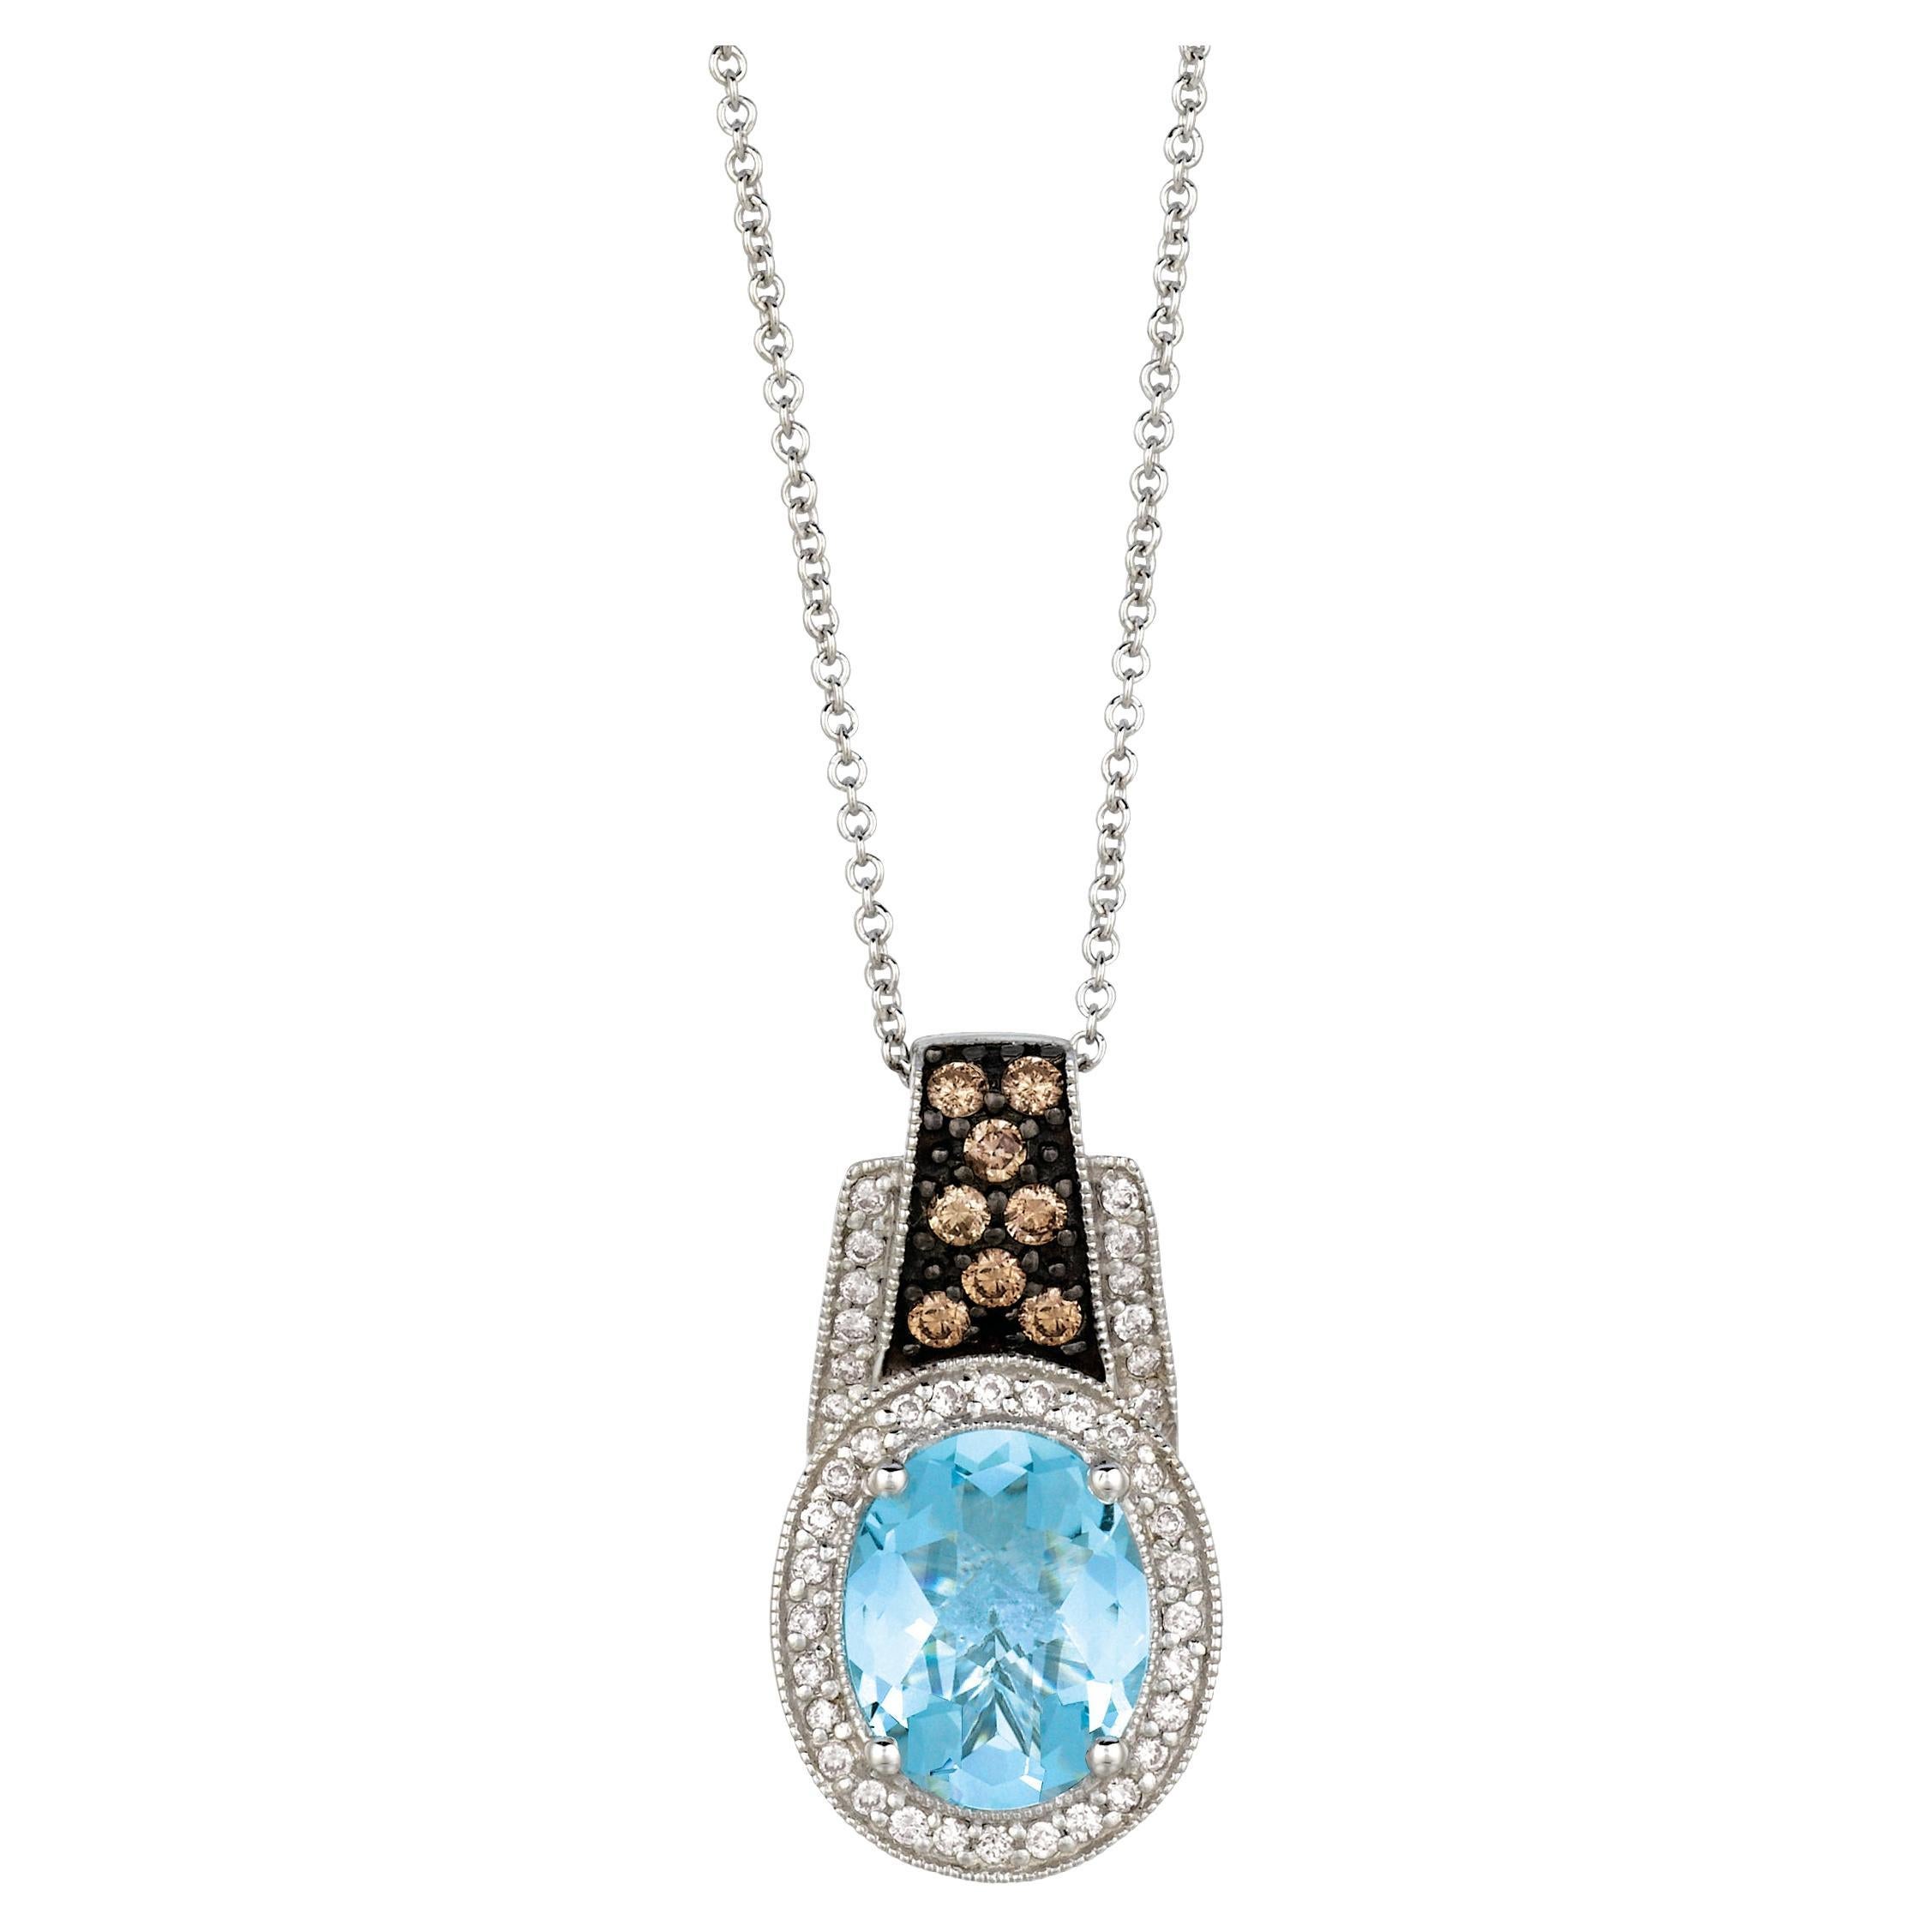 LeVian Necklace Aquamarine in 14K White Gold Pendant Aqua Oval 2 3/8 Cts For Sale